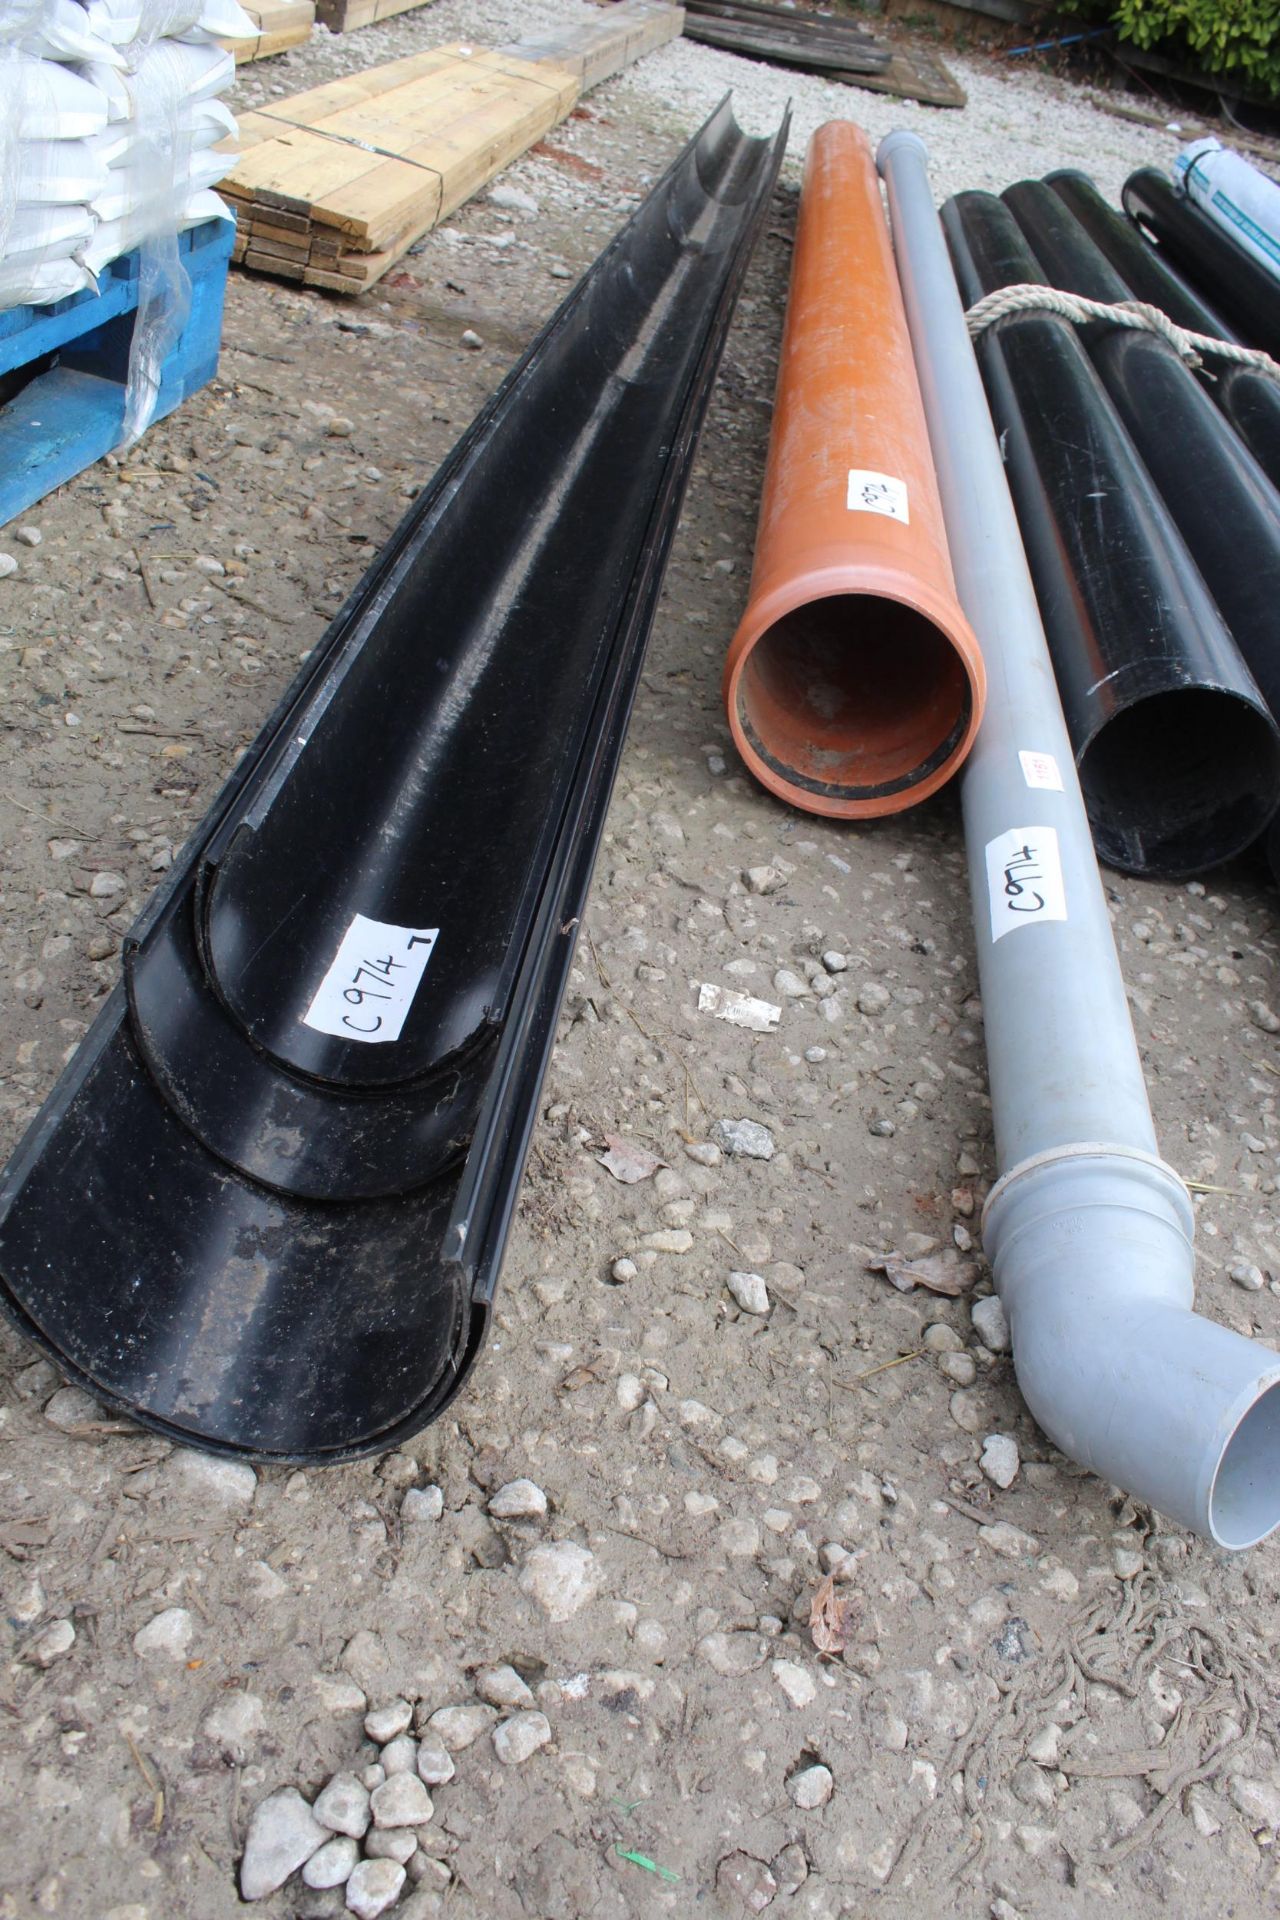 5X 150MM BLACK STORM FLOW GUTTERS 4X4M, 1x1.3M, 1x2.2M, 1x2.8M. WITH BROWN SOIL PIPE 3MX150MM AND